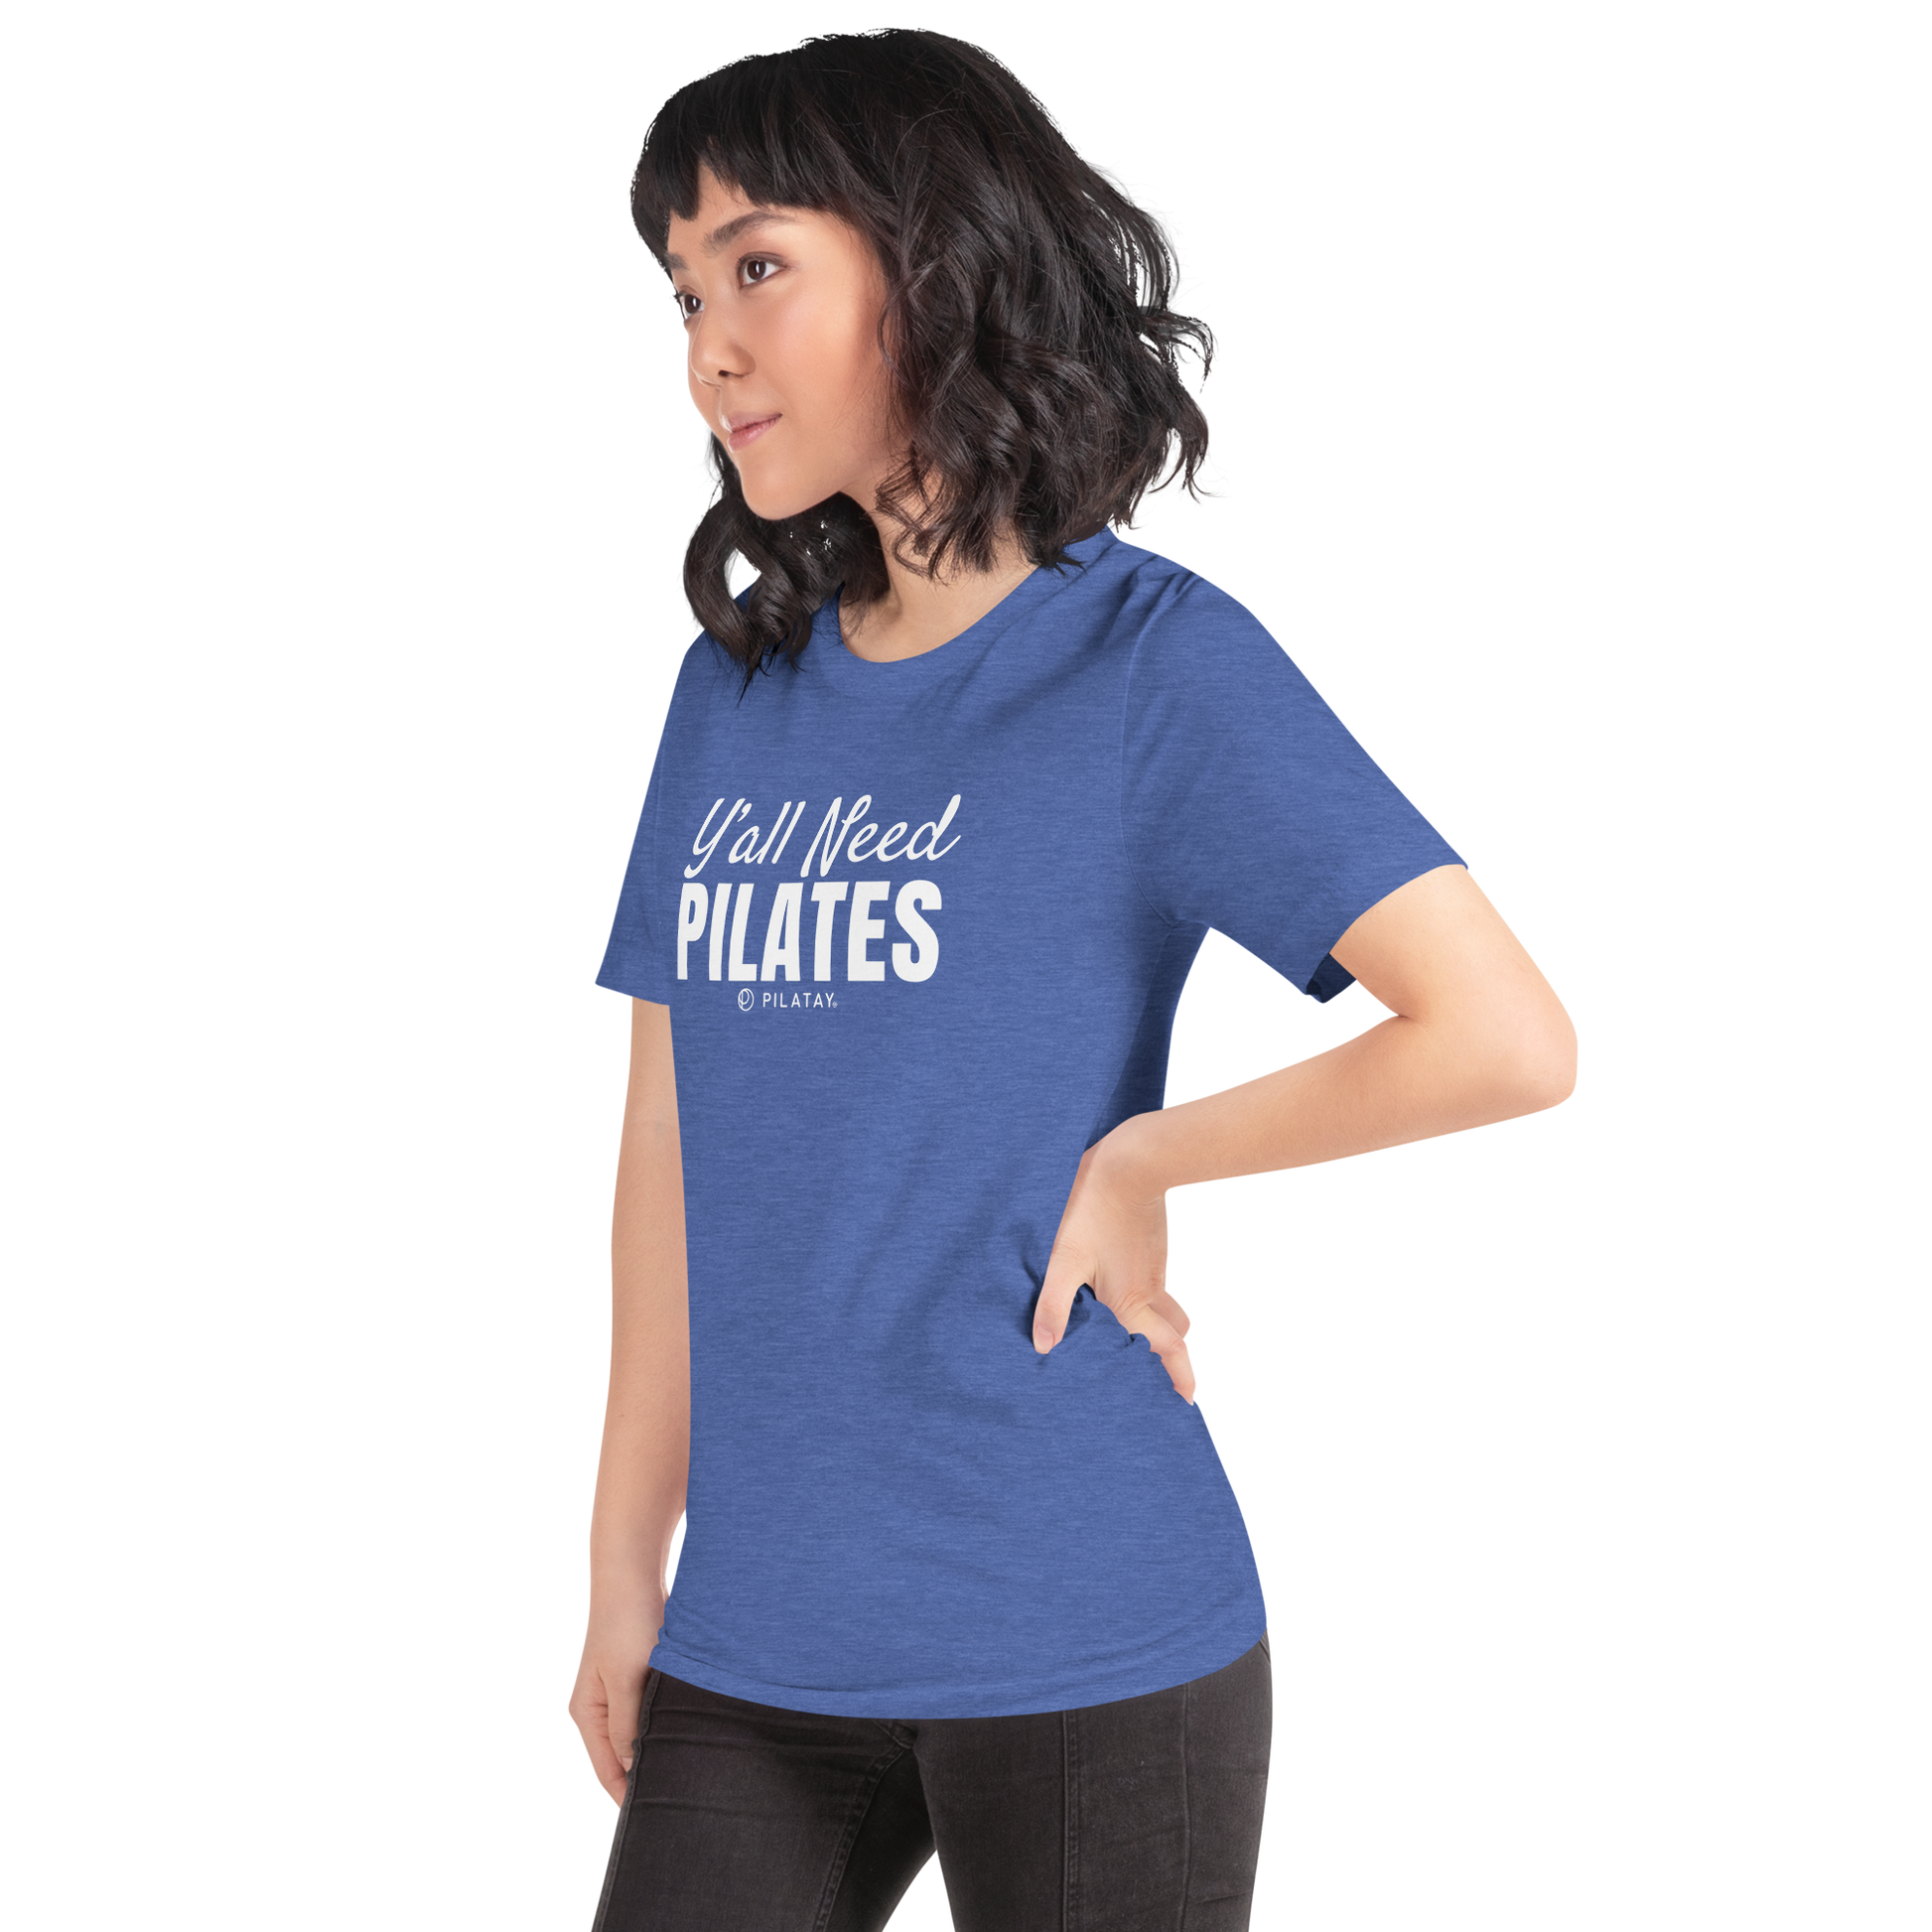 Pilates Everyday Is A Good Day To Do Meditation' Women's Organic T-Shirt